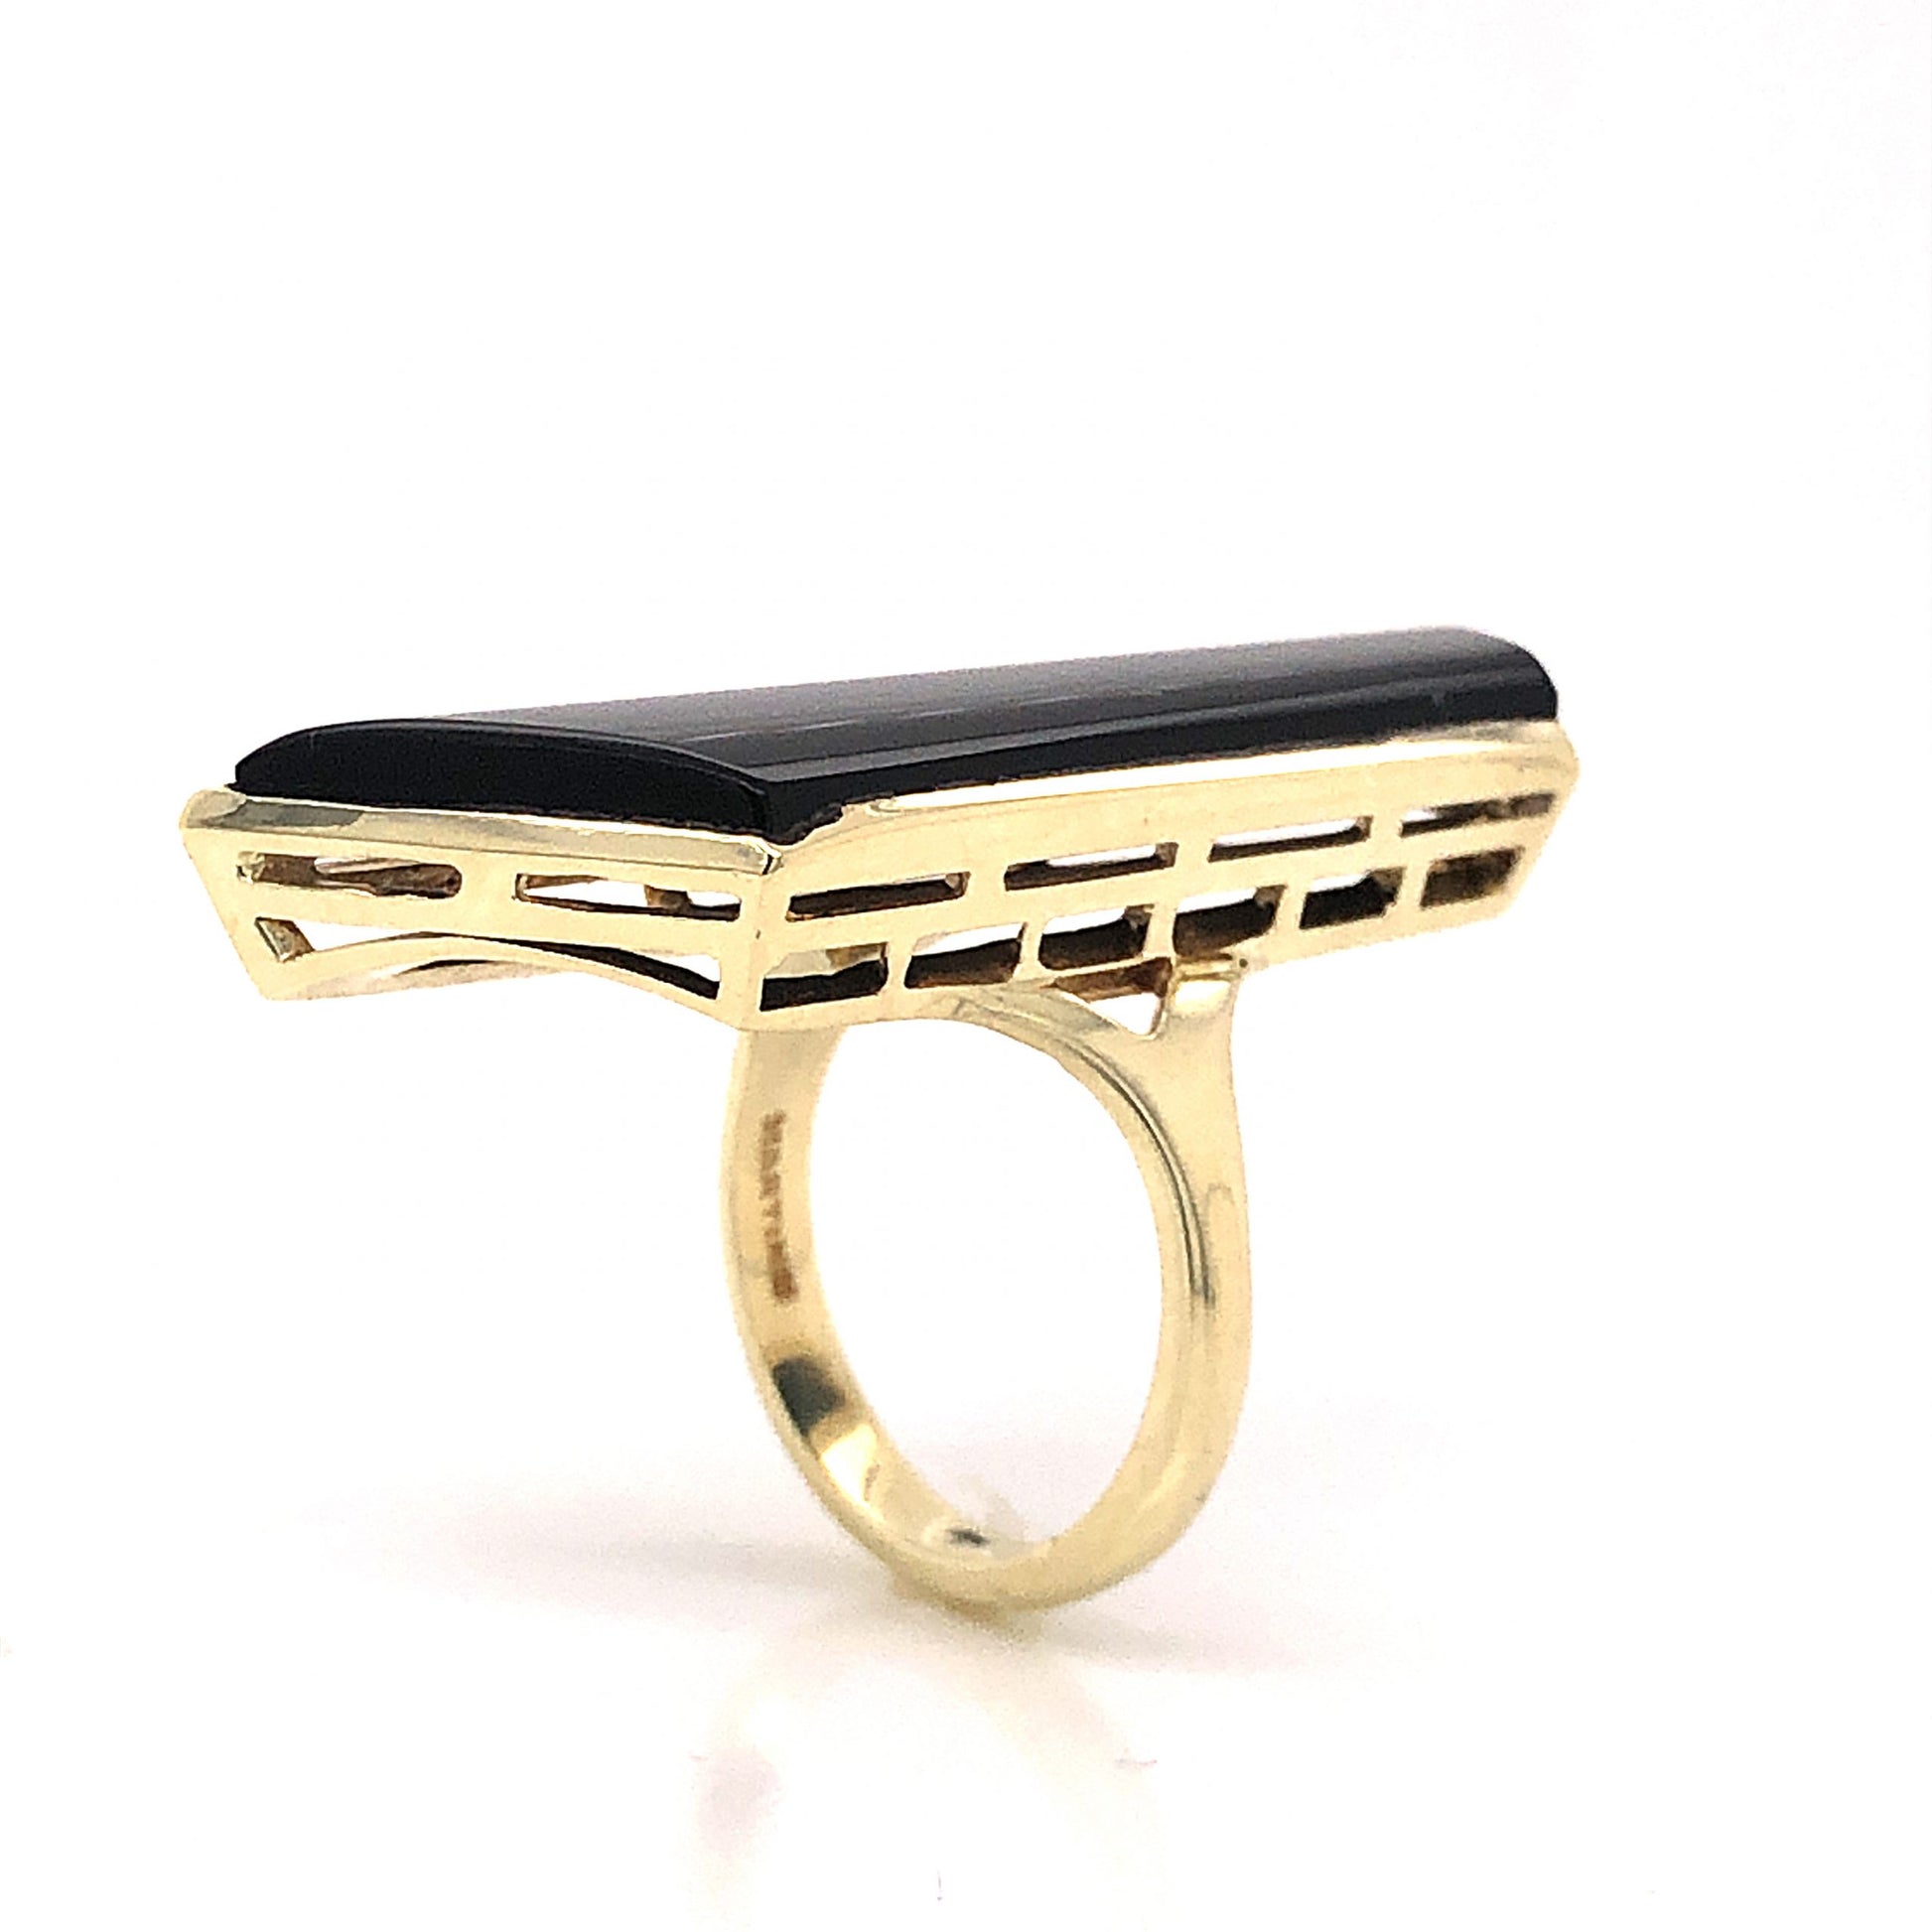 Mid-Century Onyx Shield Cocktail Ring 14k Yellow GoldComposition: 14 Karat Yellow GoldRing Size: 6.25Total Gram Weight: 9.2 gInscription: 14k